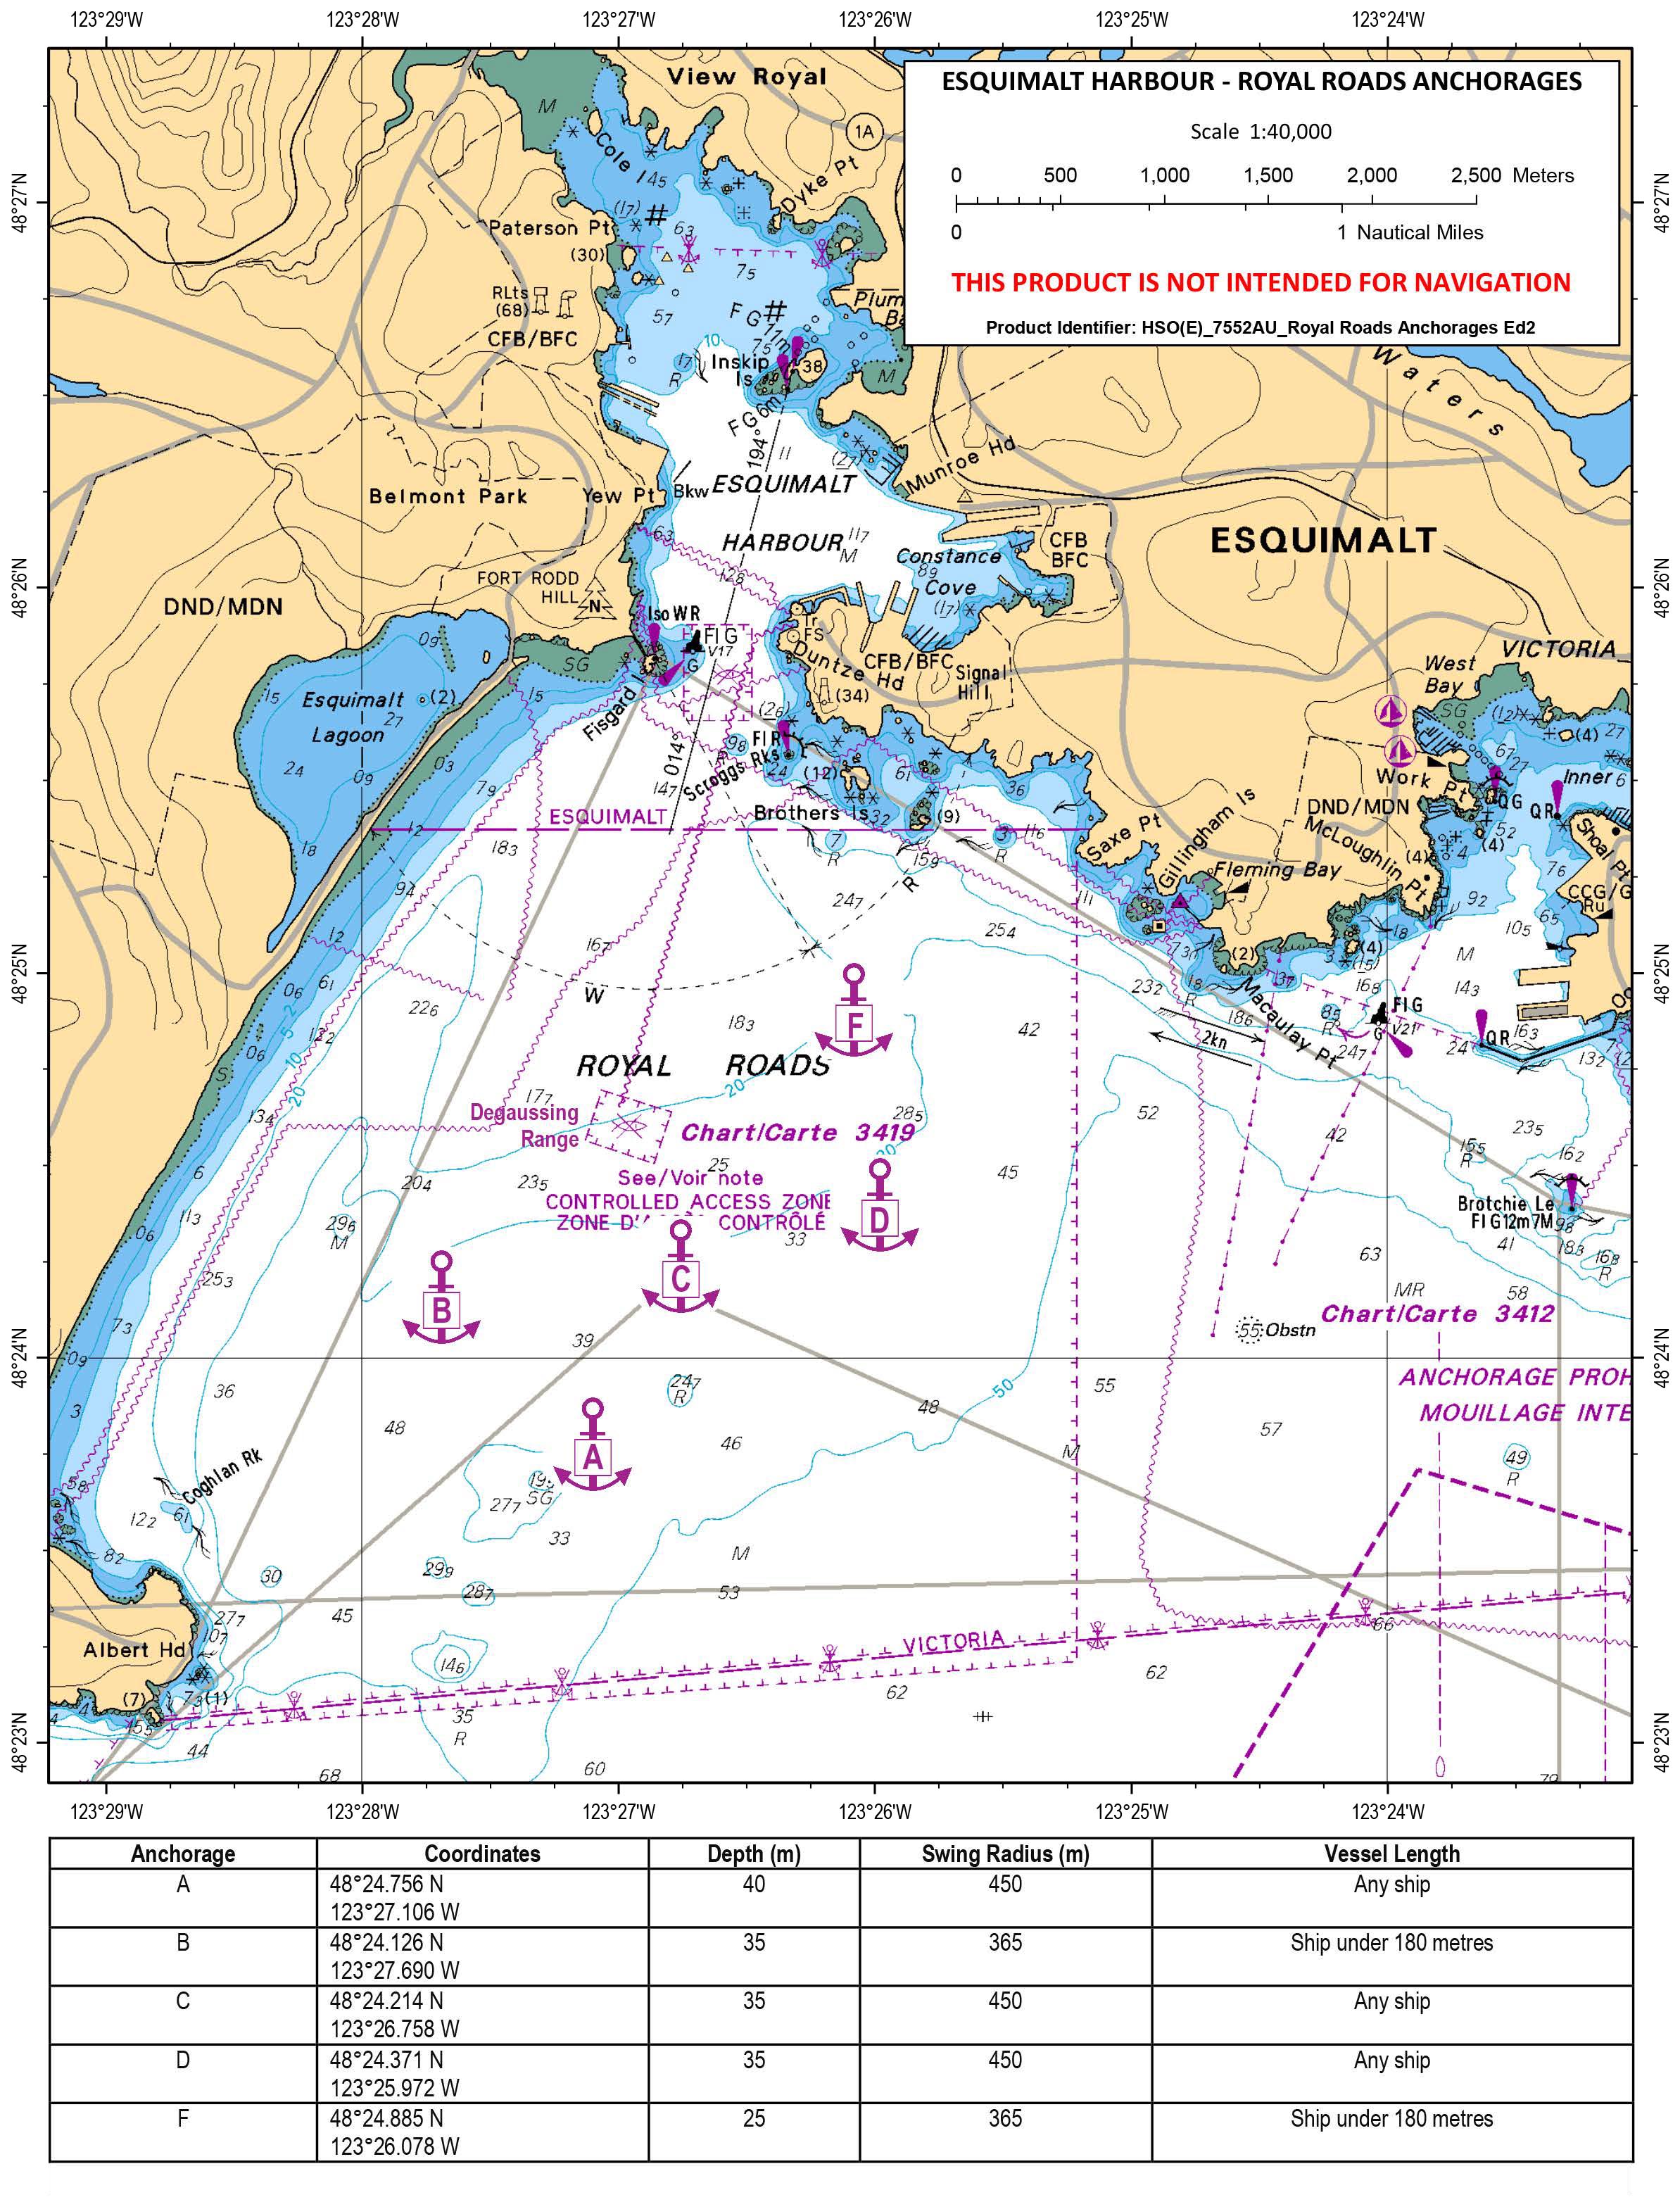 Equimalt Harbour - Royal Roads Anchorages Chart: This product is not intended for navigation